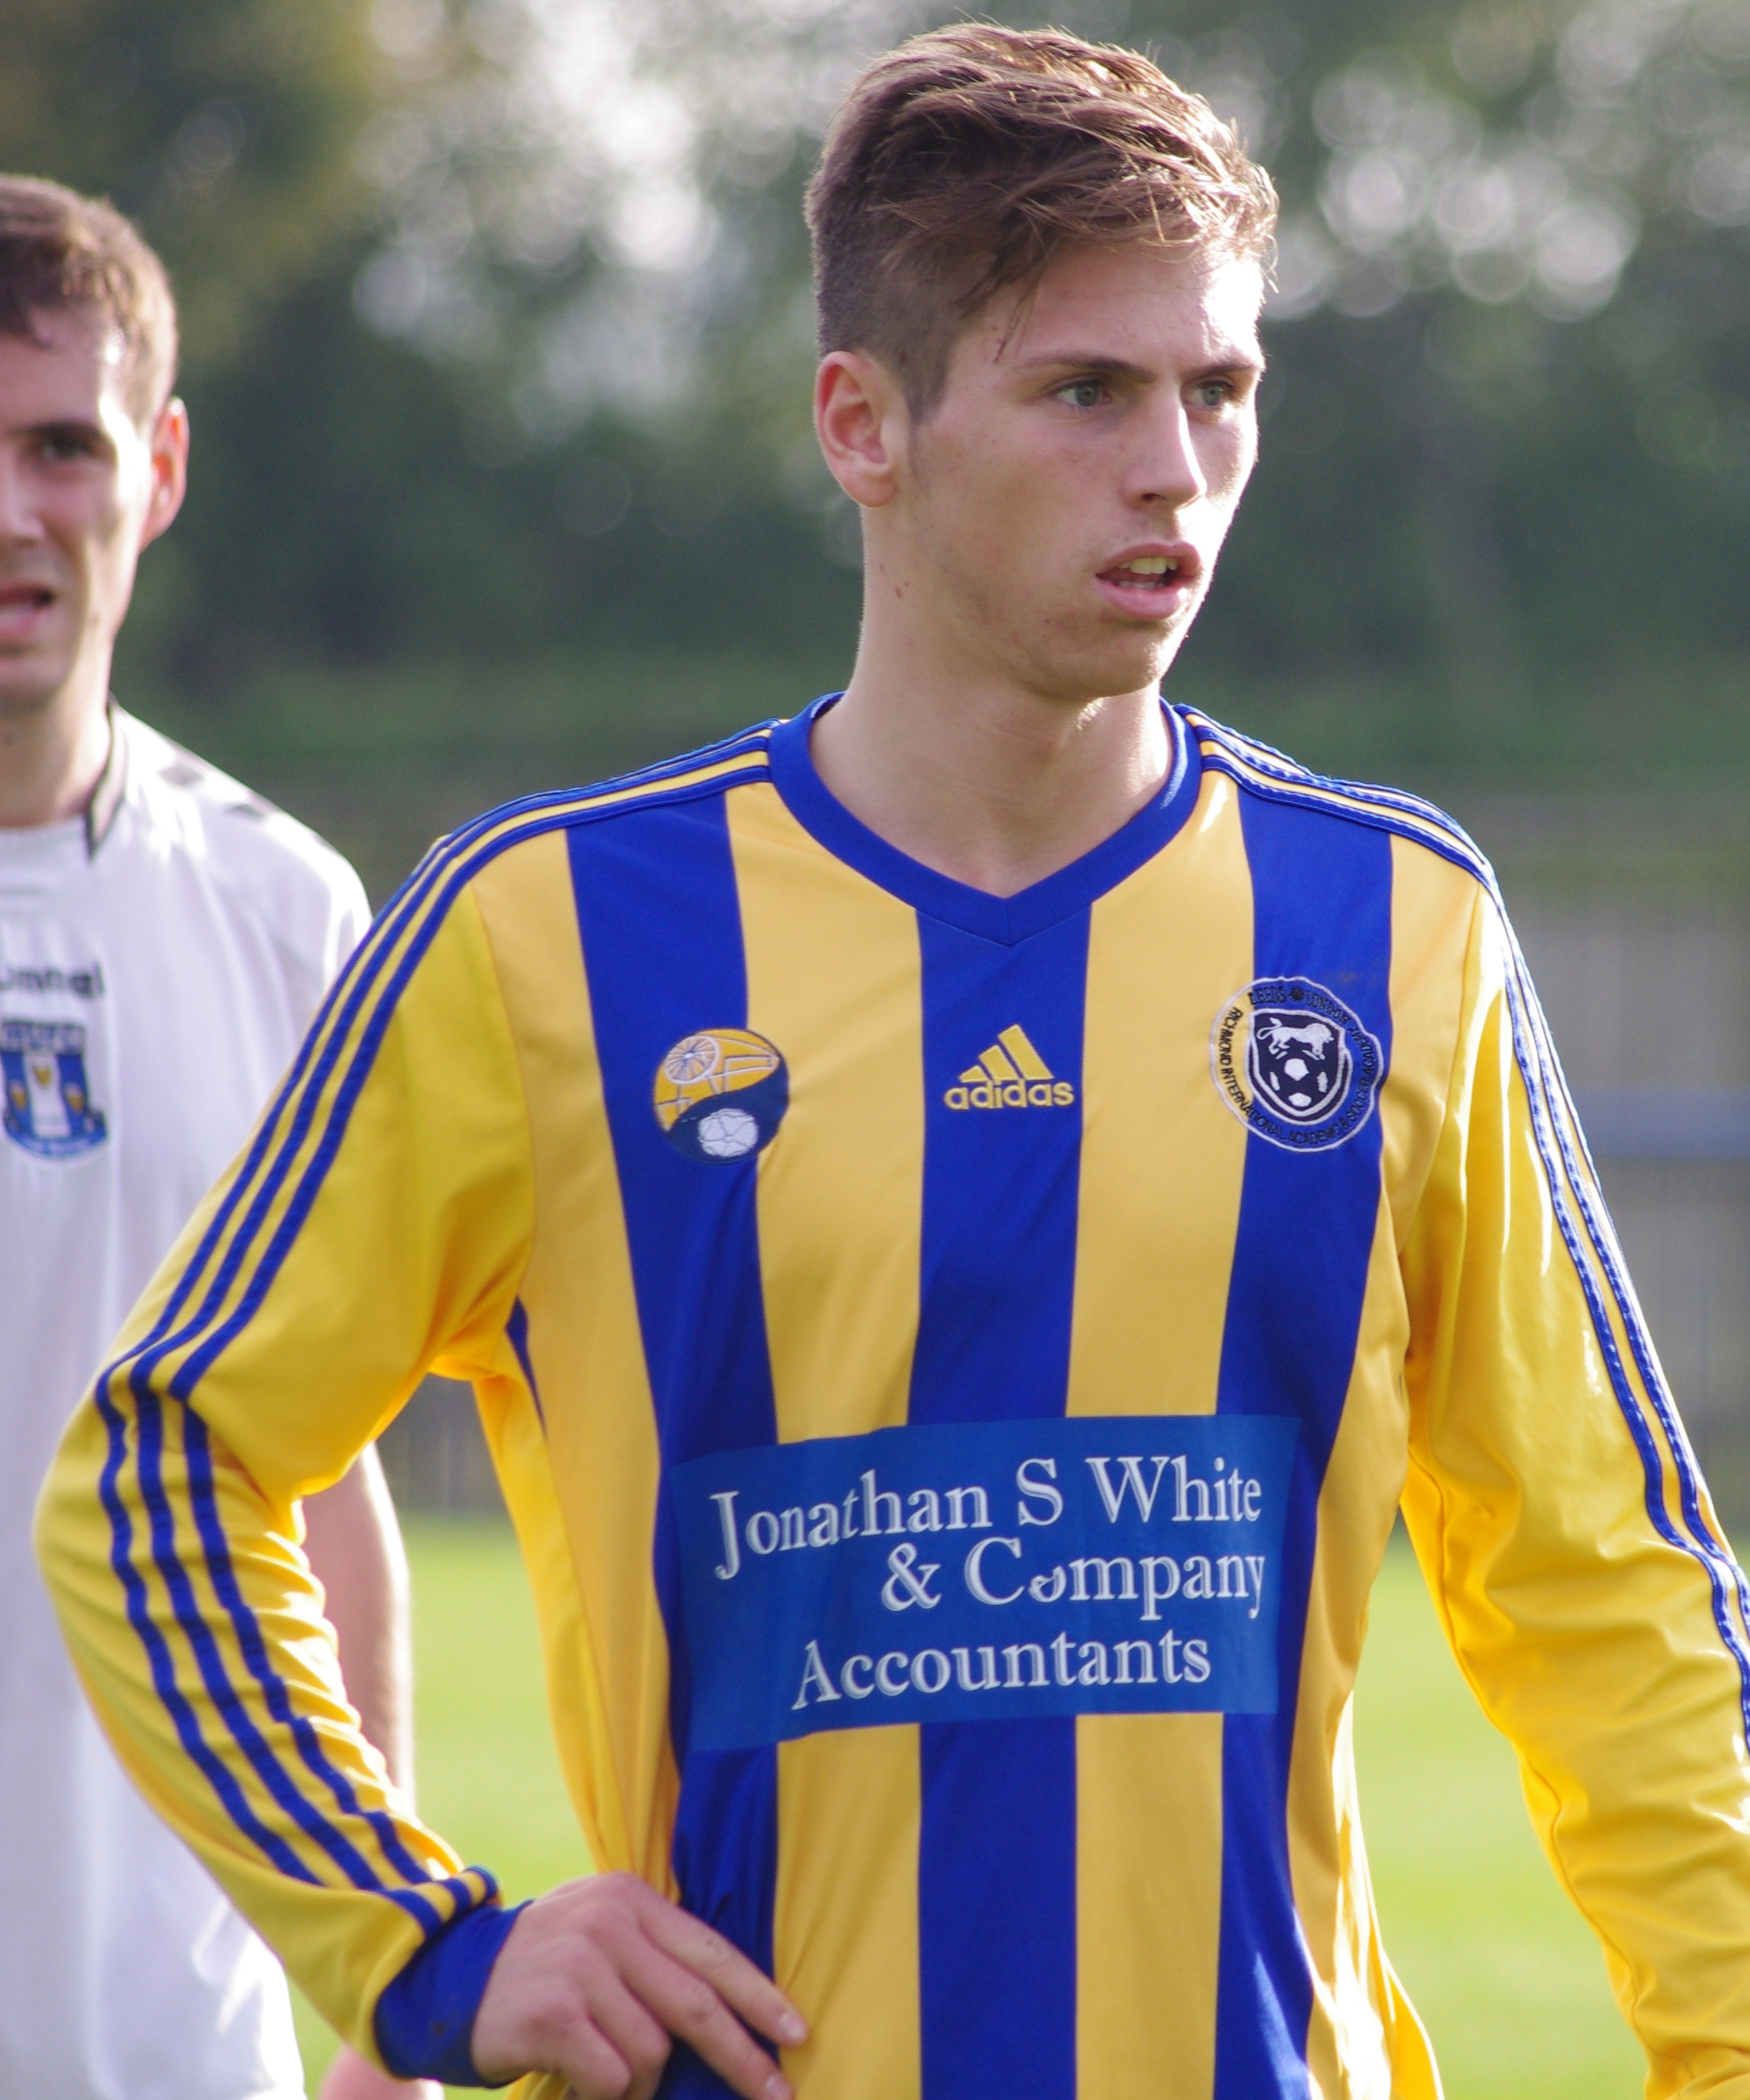 Connor Bower pulled the first goal for Garforth